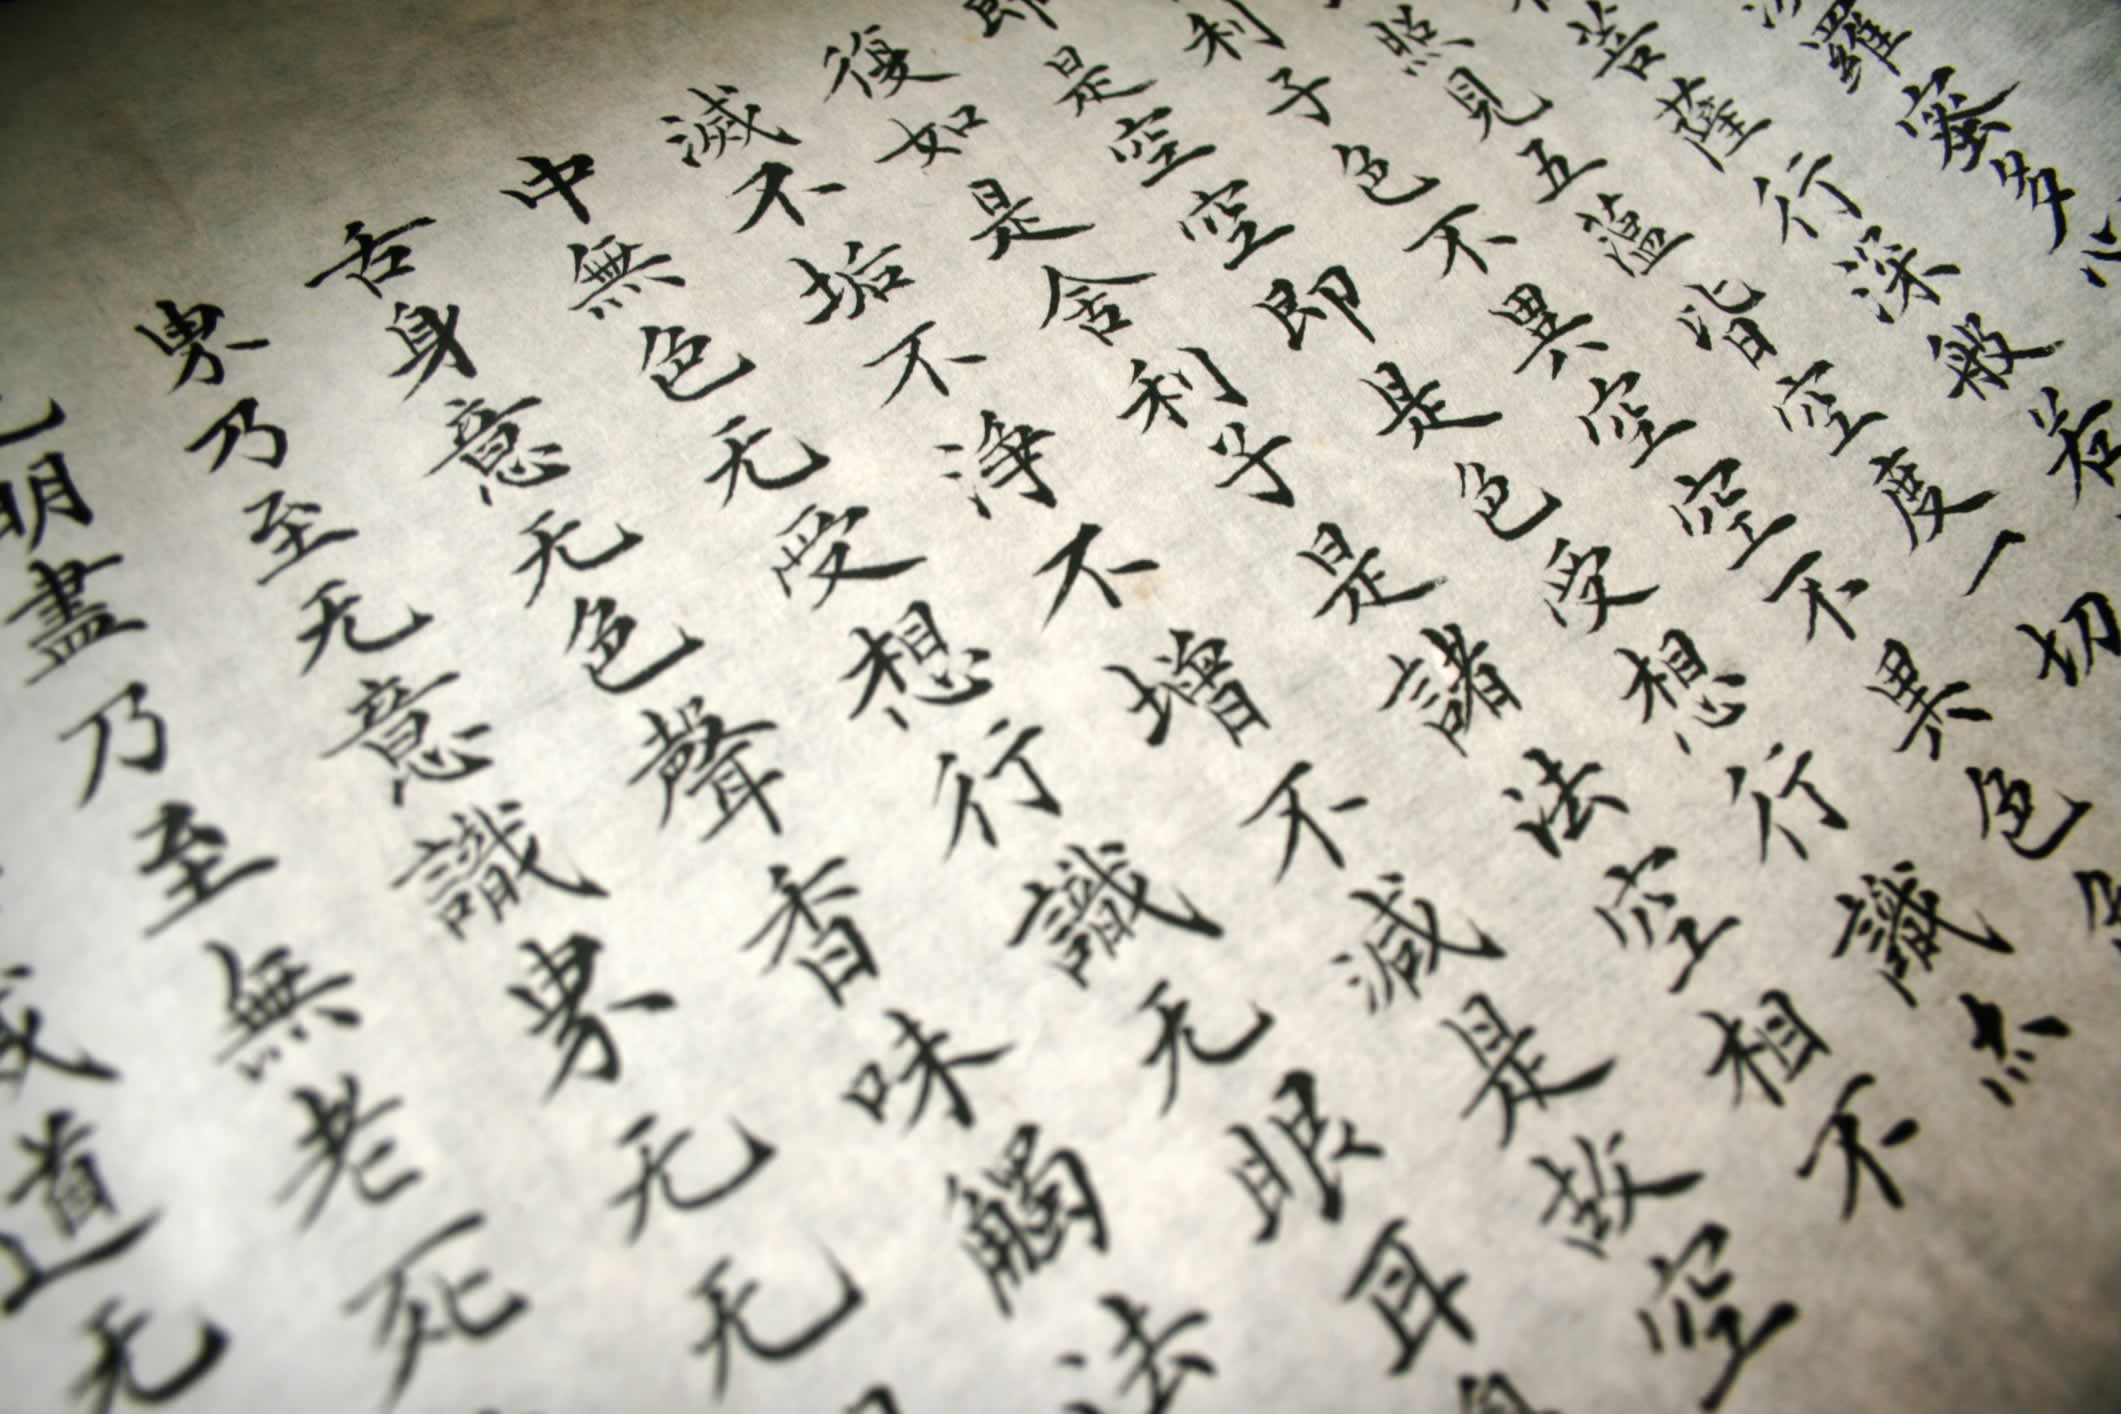 A poem about wisdom written in Chinese calligraphy